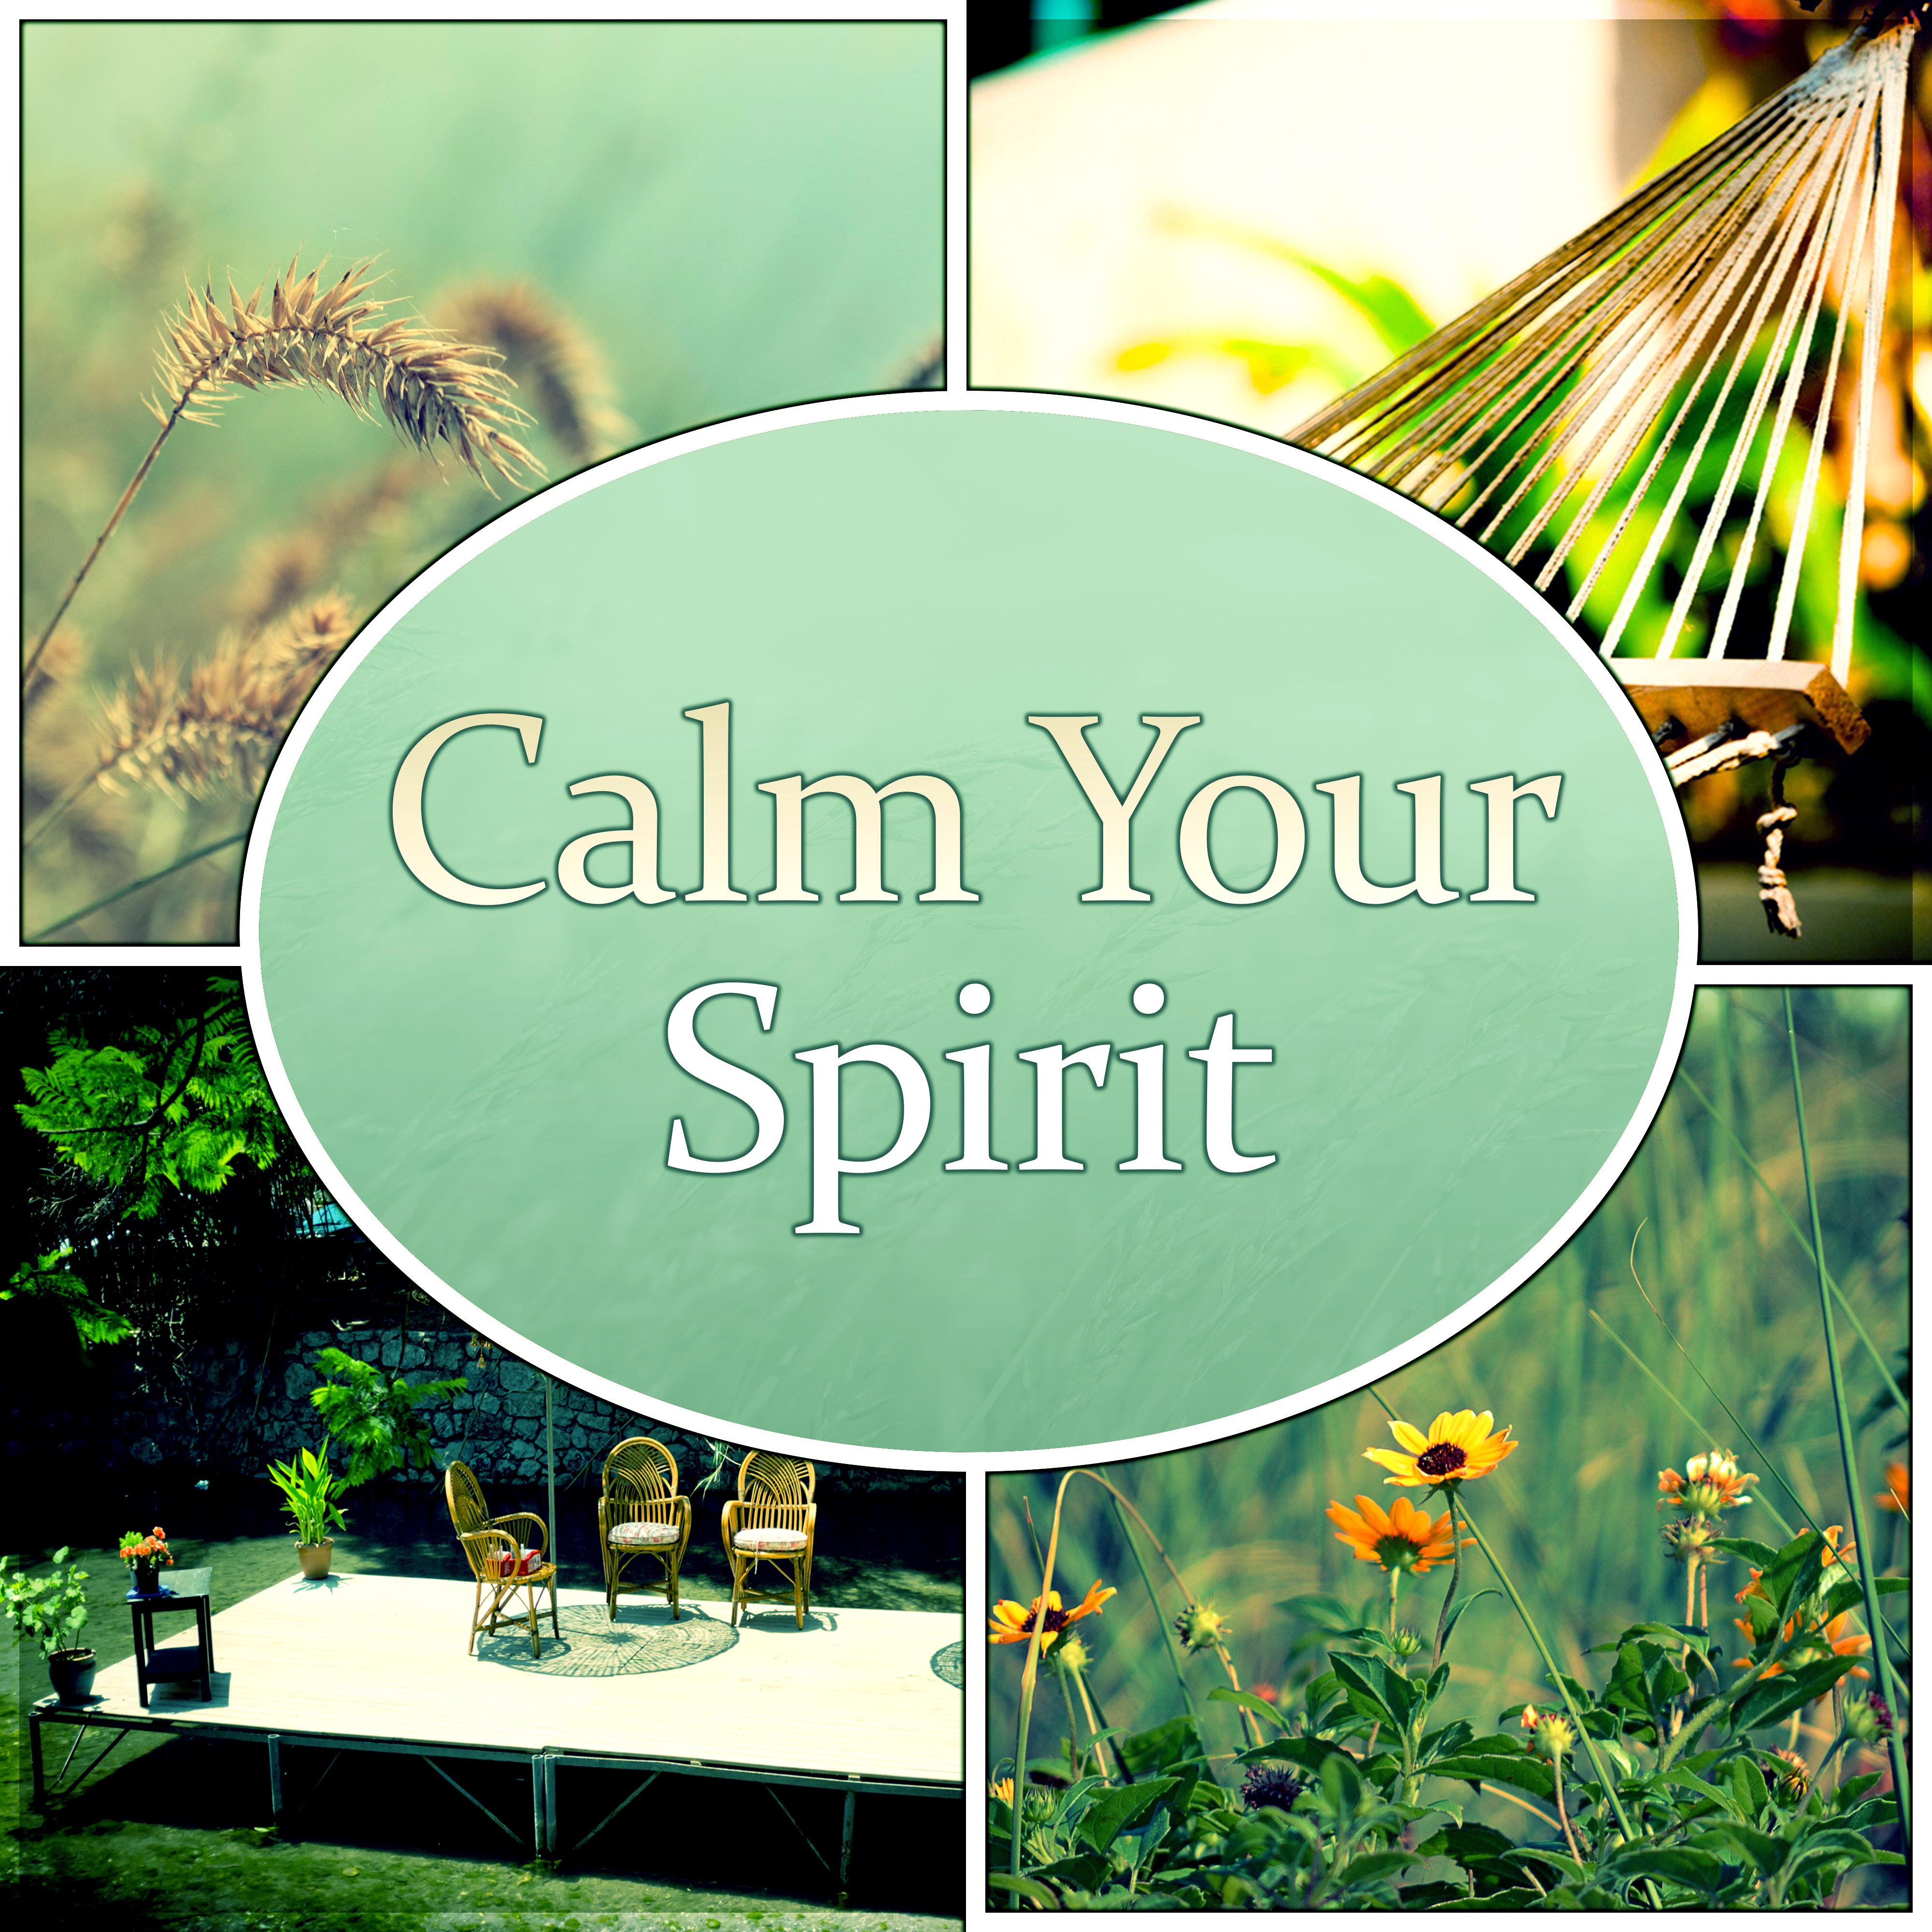 Calm Your Spirit - Ambient Music for Restful Sleep, Natural Deep Sleep, Sounds of Nature, Ambient Sounds for Inner Peace and Reduce Stress